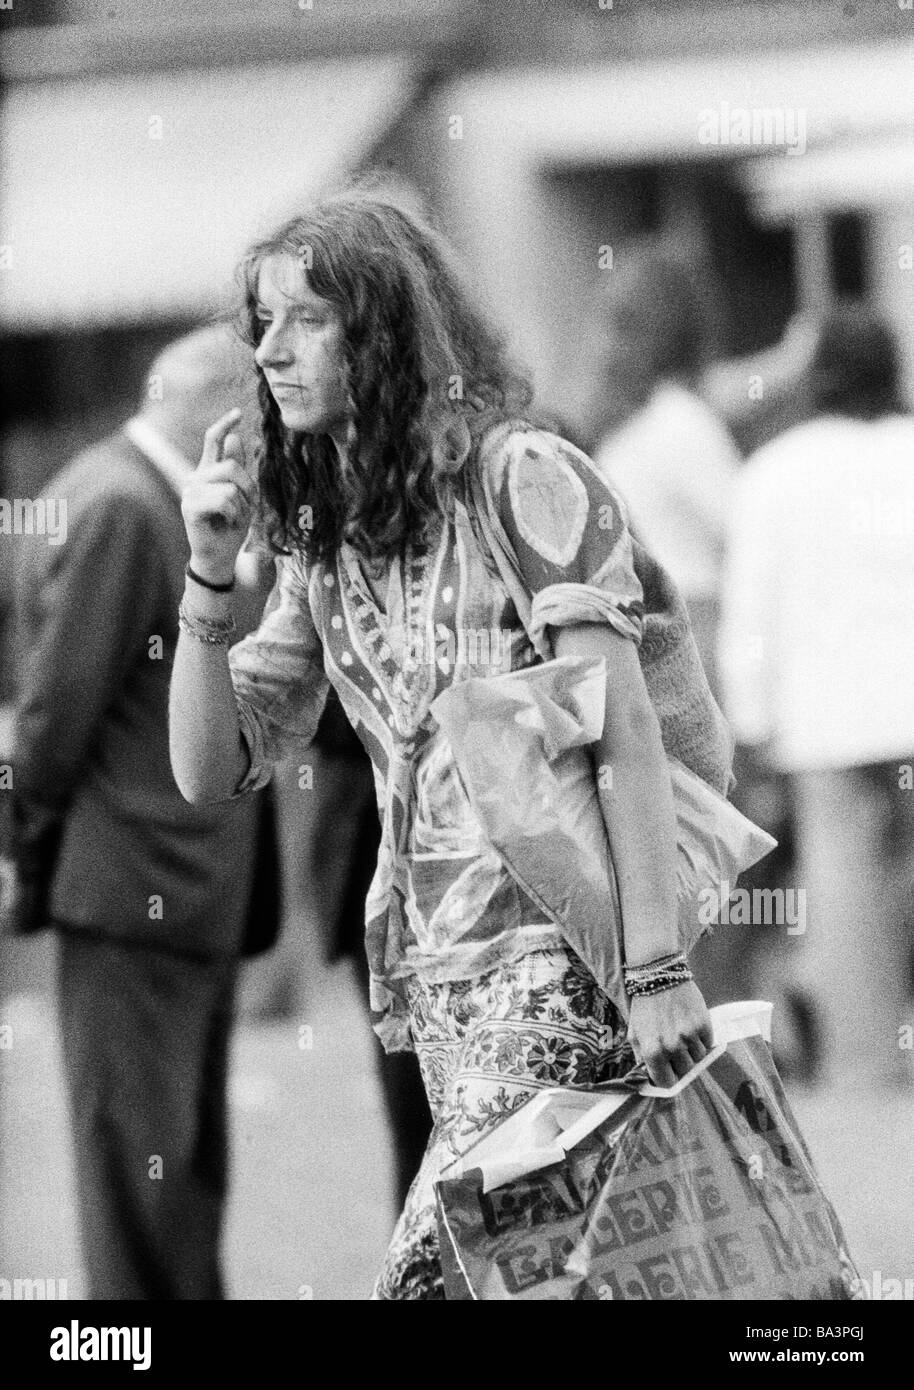 Seventies, black and white photo, people, young woman, aged 30 to 35 years, everyday life, shopping, grocery bags, shopping bags, Netherlands, Amsterdam Stock Photo